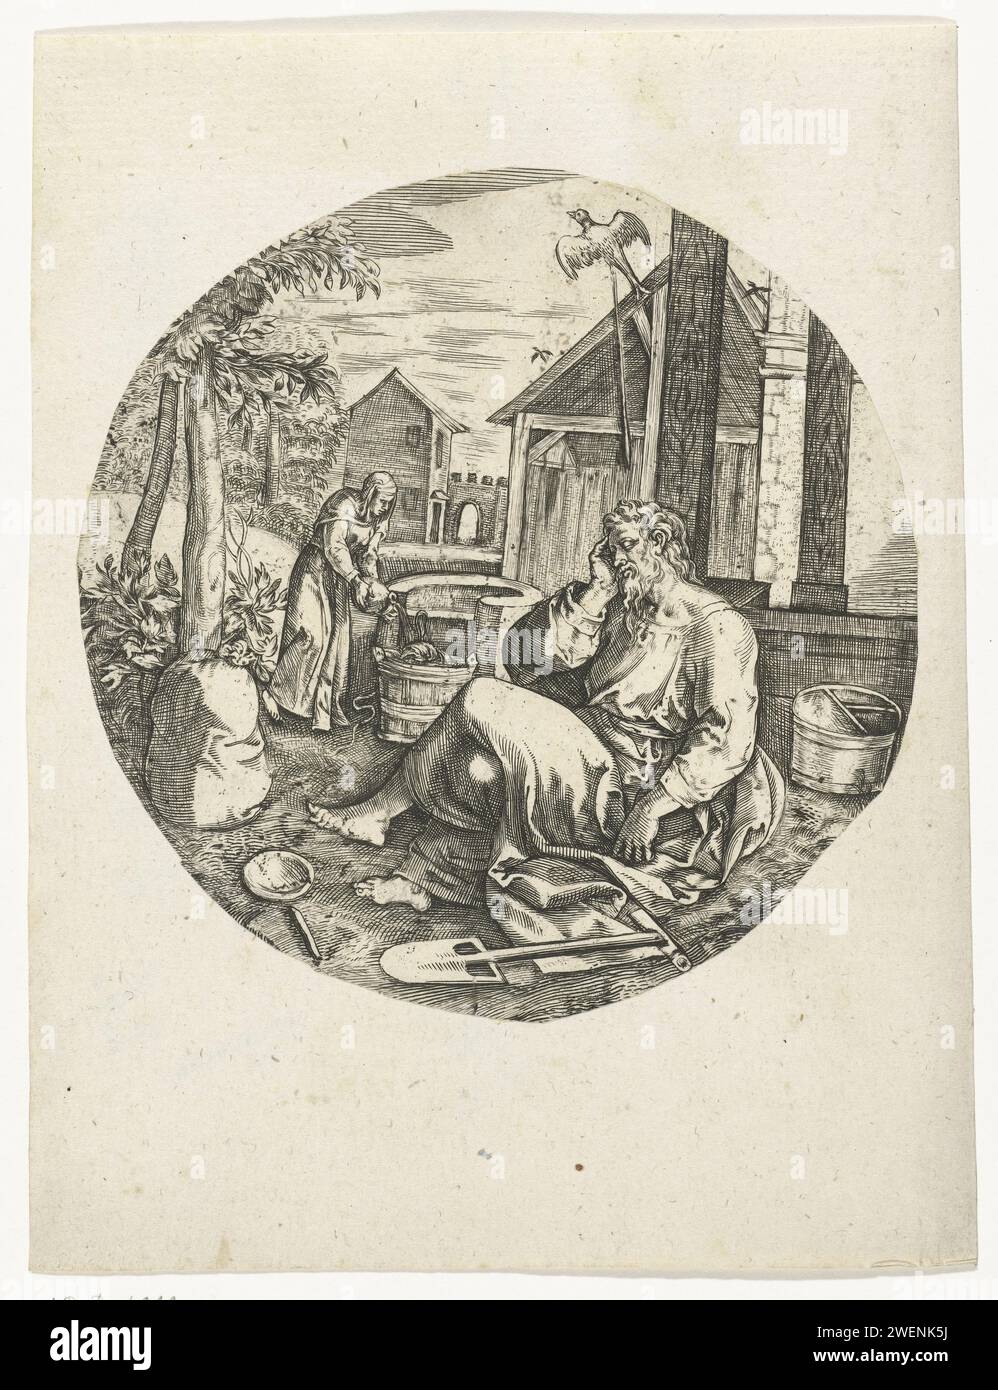 Tobit with blindness, anonymous, after Chrispijn van den Broeck, 1570 - 1580 print Tobit is sleeping against the wall of his house. A bird flies above his head and the bird droppings falls on his eyes. There are a spa and nap next to him. His wife Sara is working on the second plan. .  paper engraving a bird dropping falls in Tobit's eyes Stock Photo